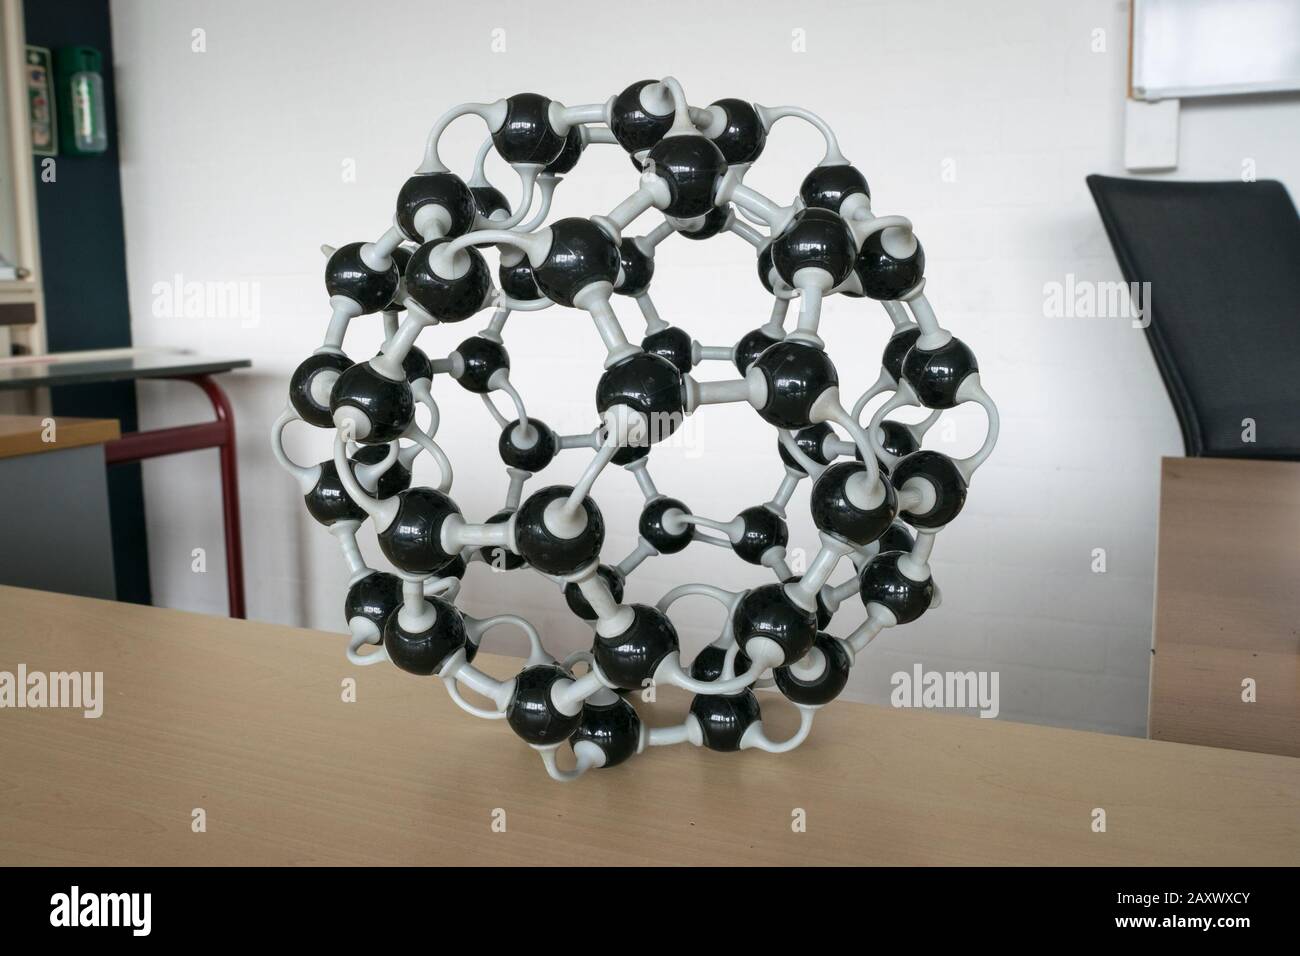 3-D model of carbon molecule (C60) also known as fullerene or  buckminsterfullerene. Football shaped molecule model used in chemistry or biology class Stock Photo